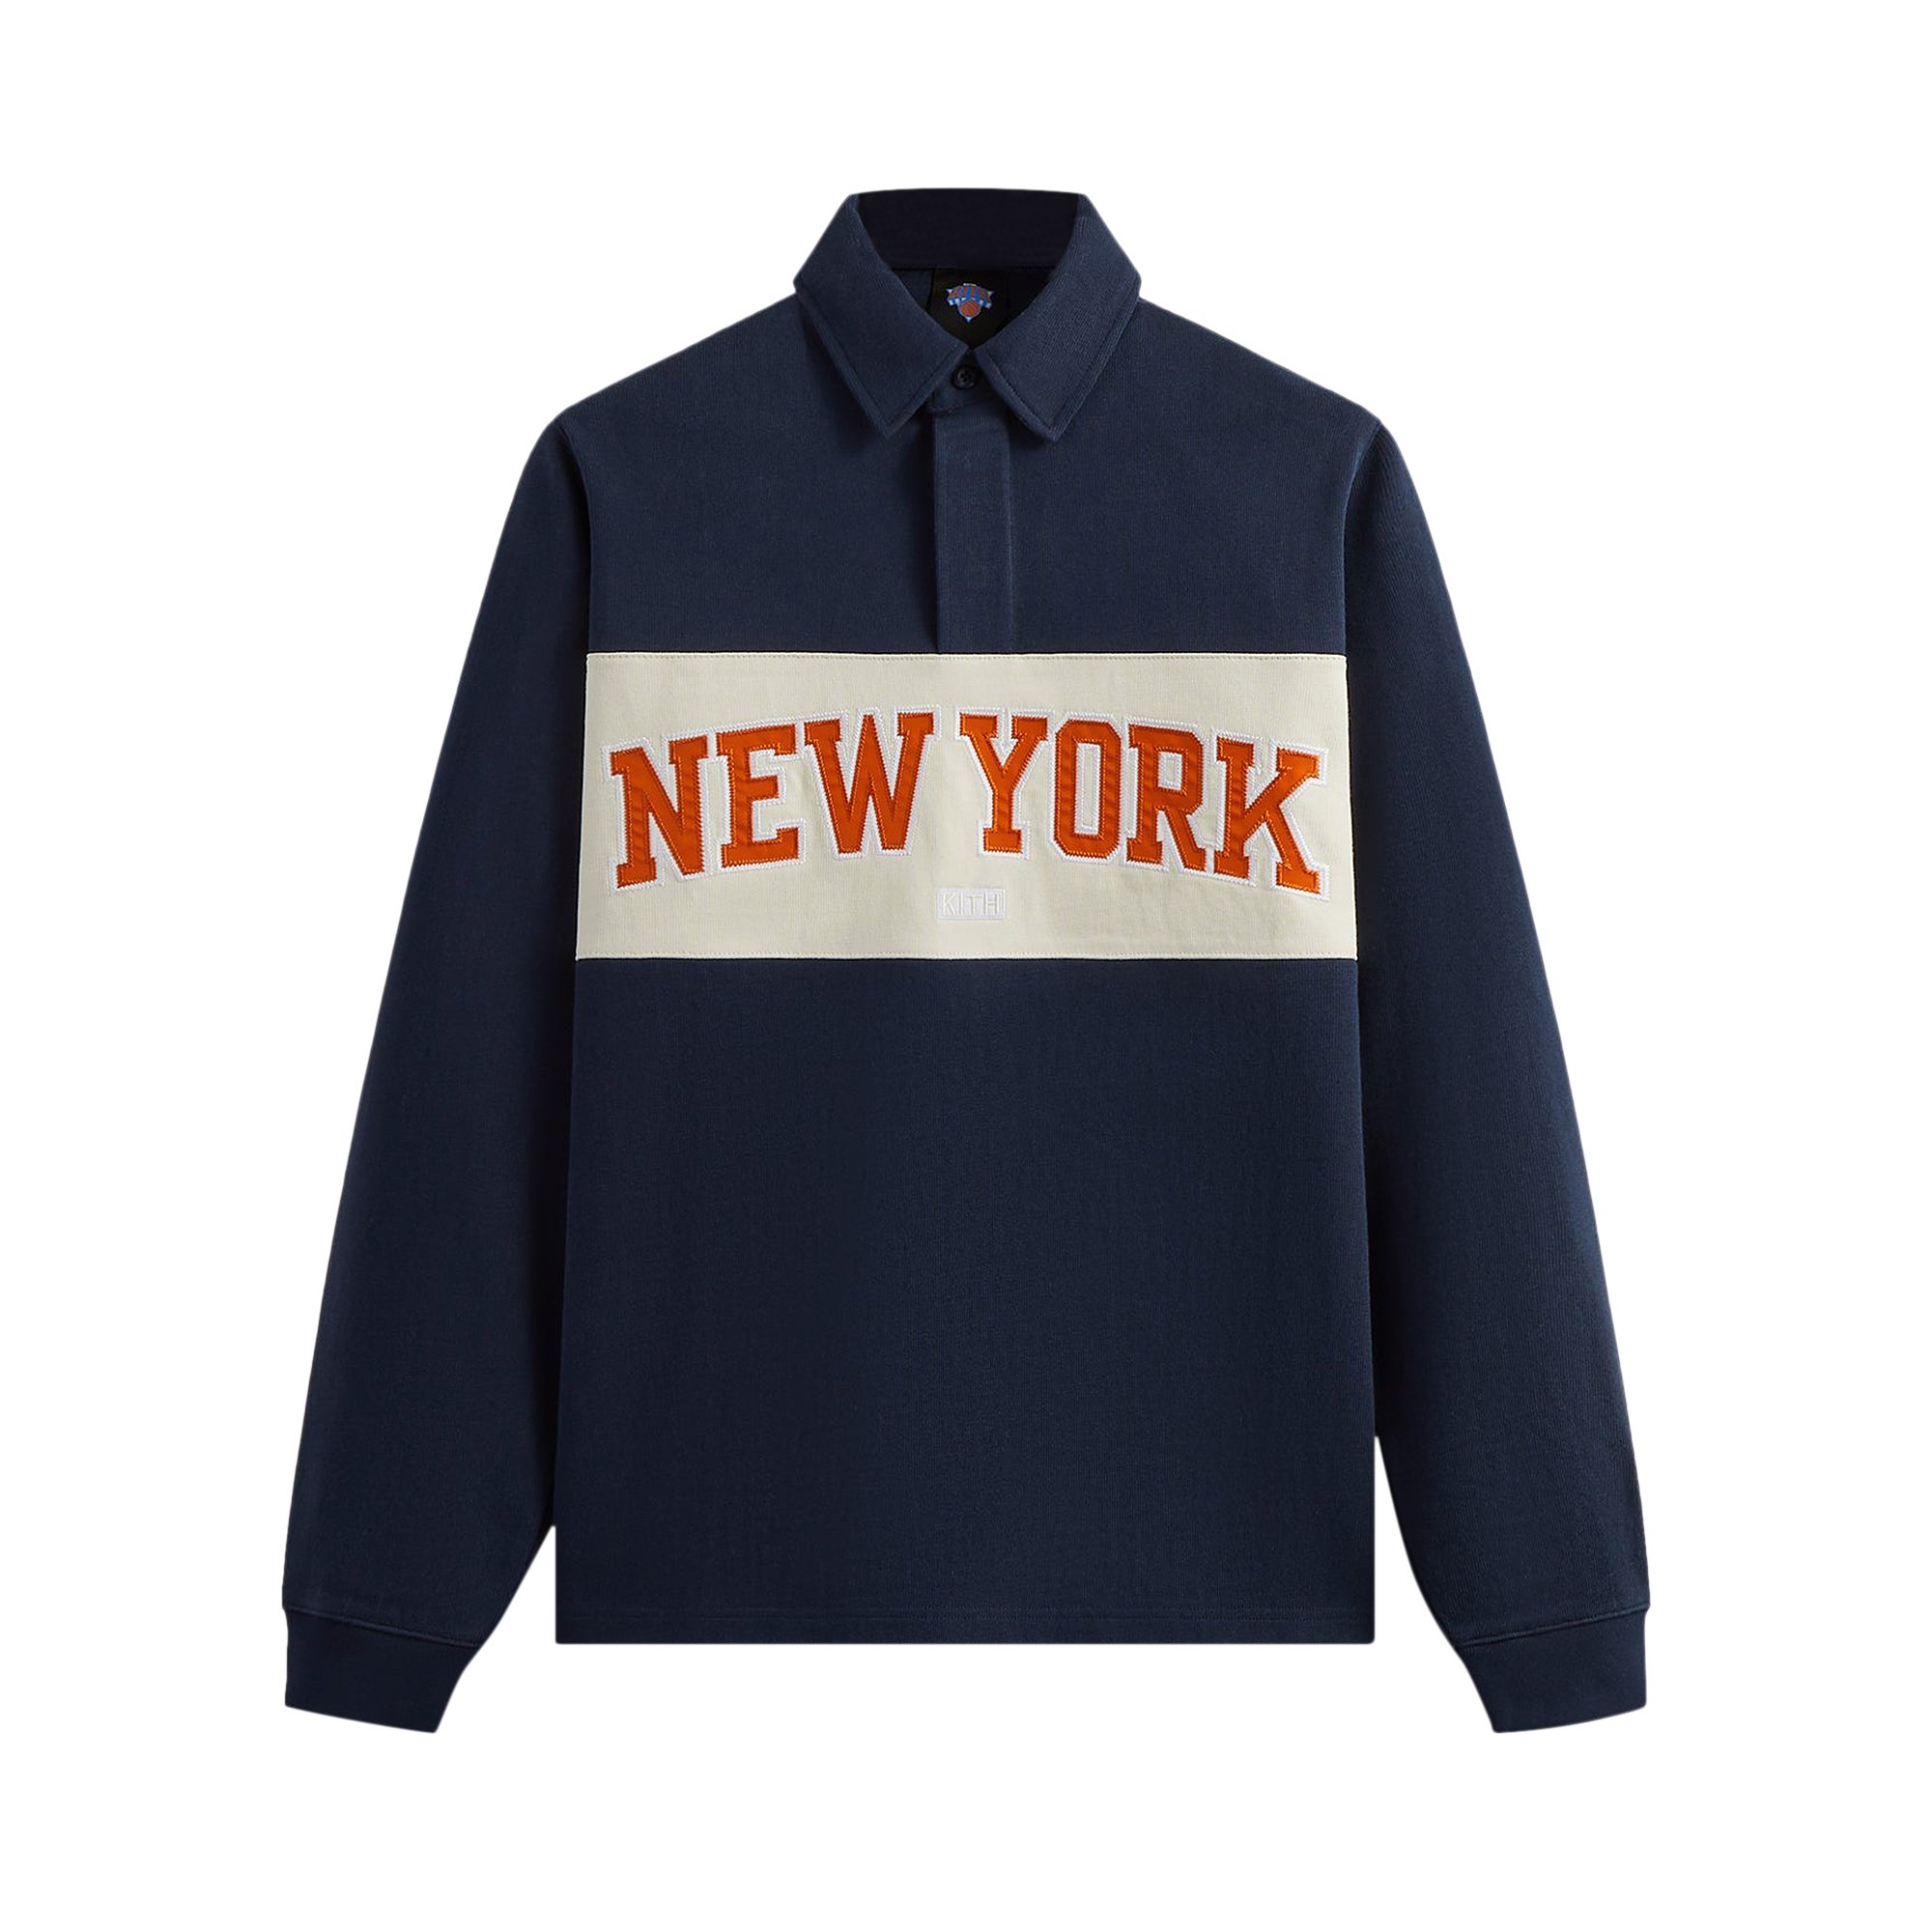 Kith For The New York Knicks Long-Sleeve Rugby Shirt 'Nocturnal'